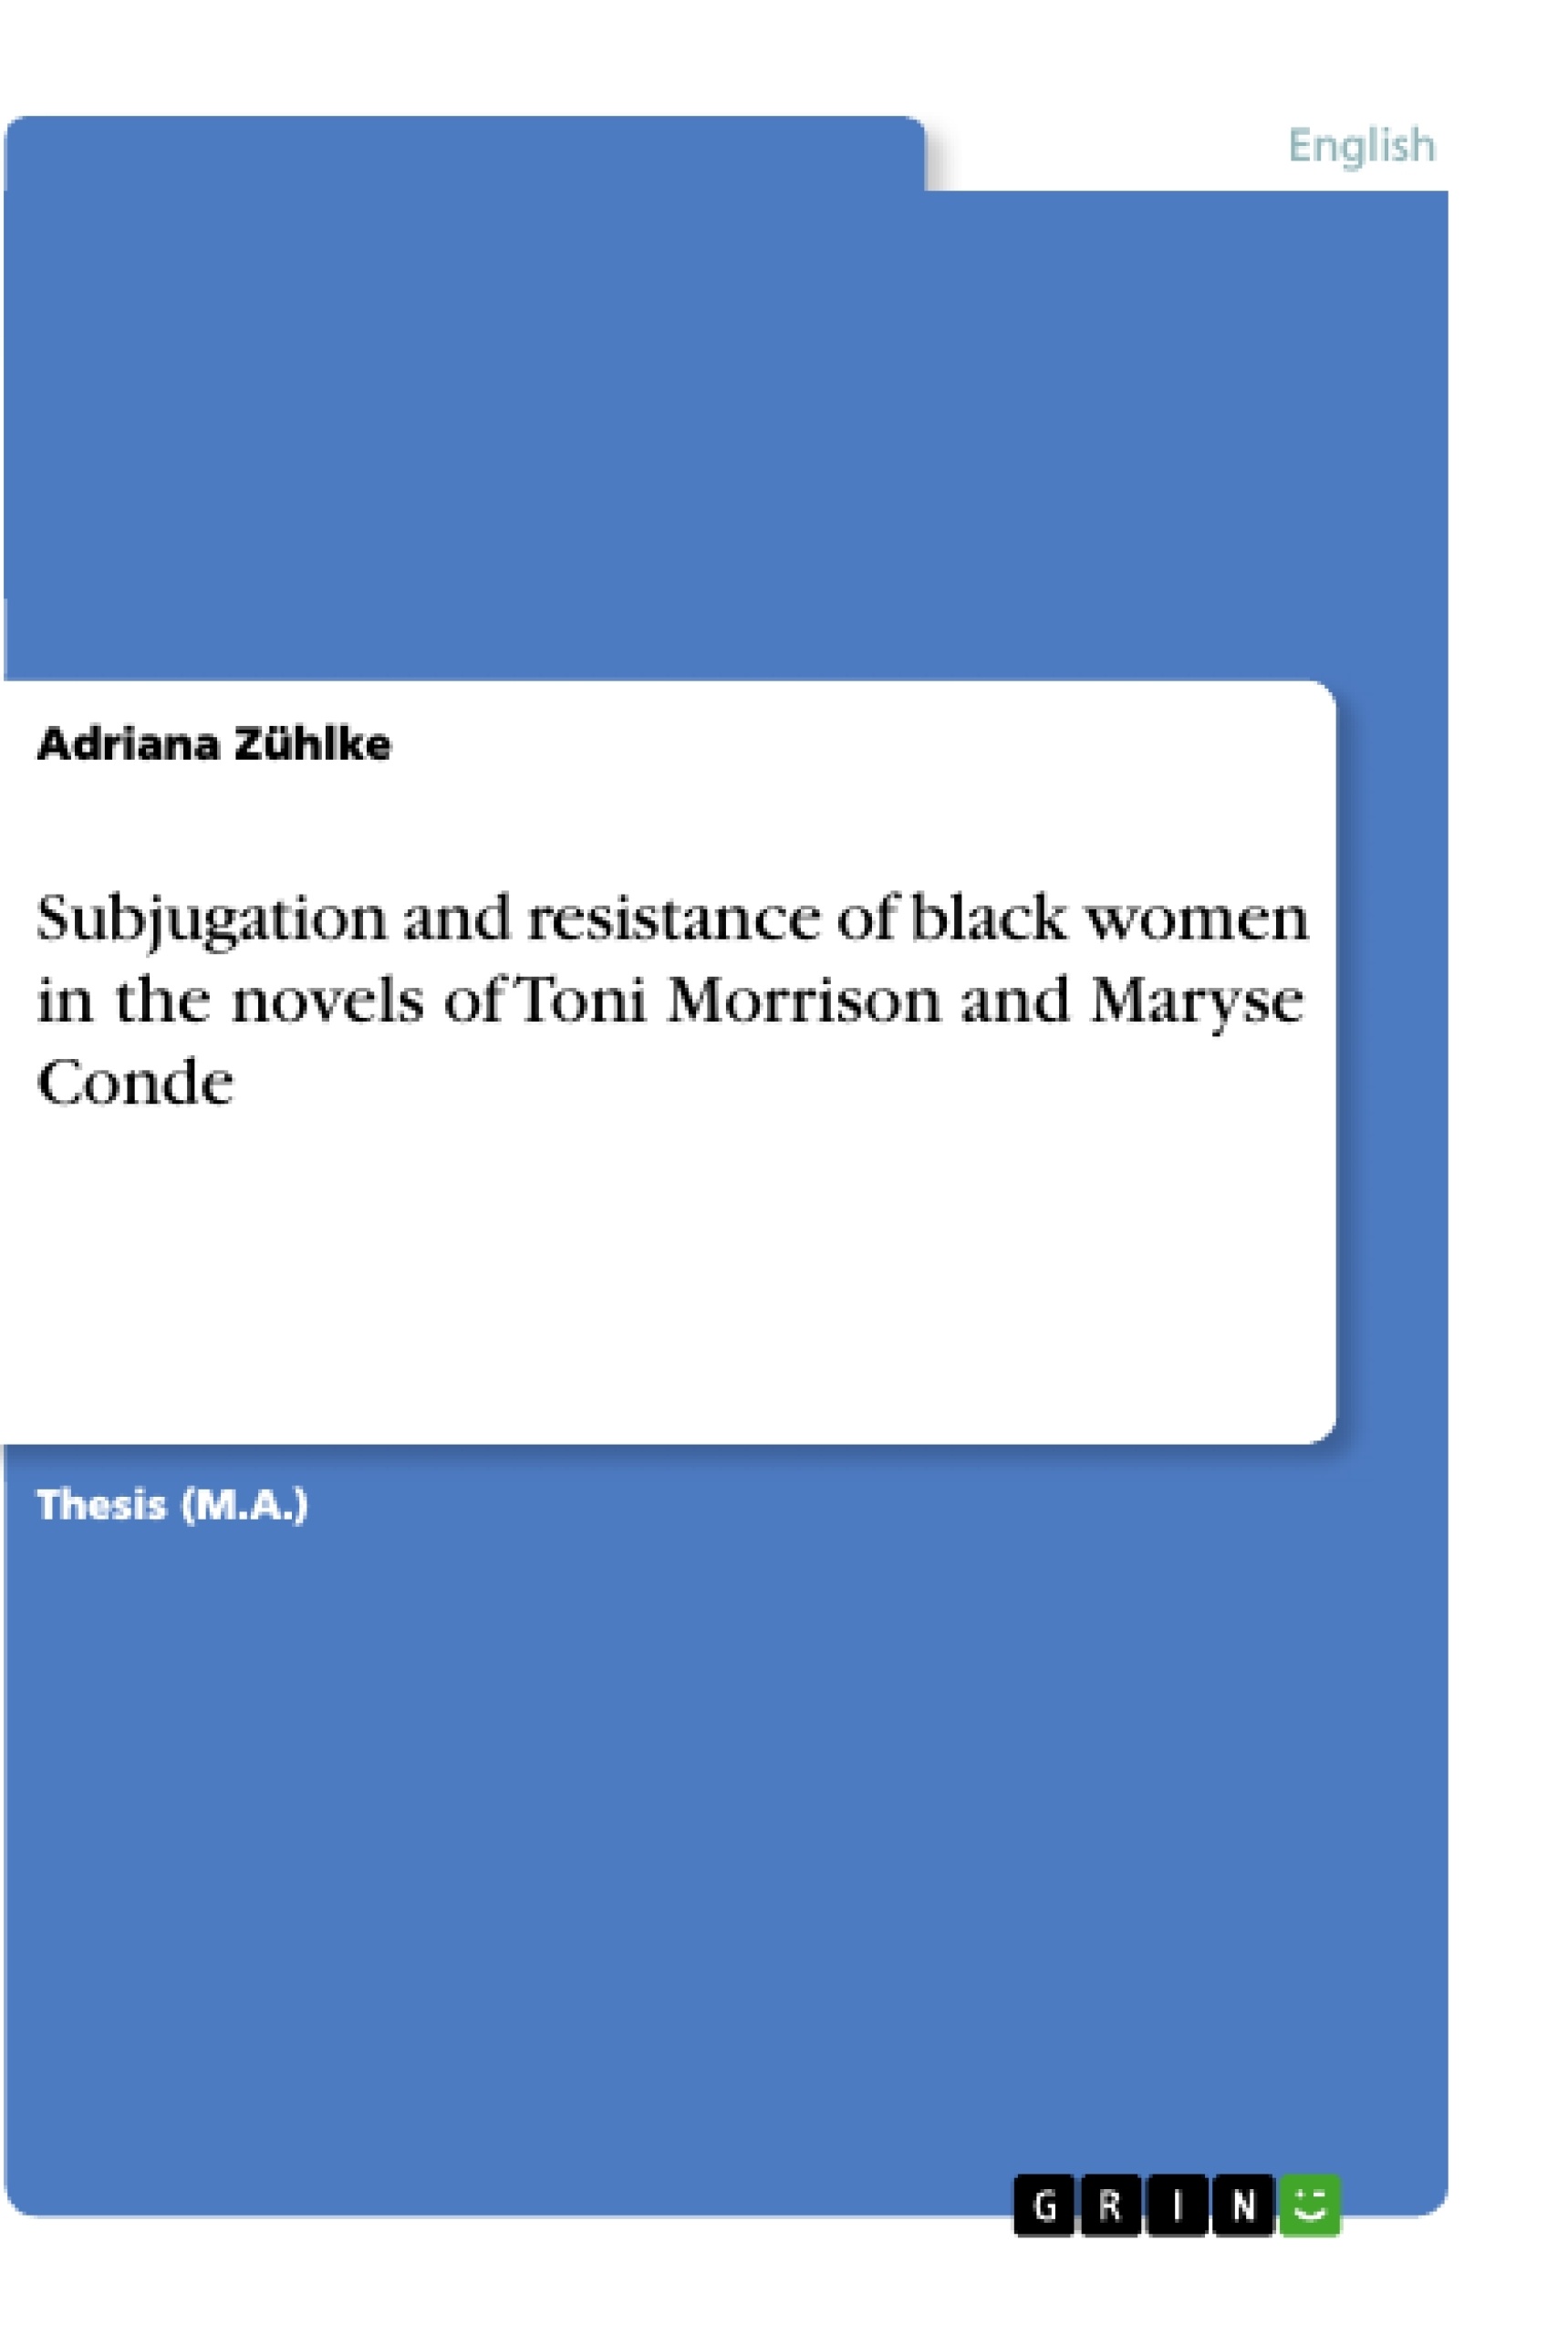 Title: Subjugation and resistance of black women in the novels of Toni Morrison and Maryse Conde